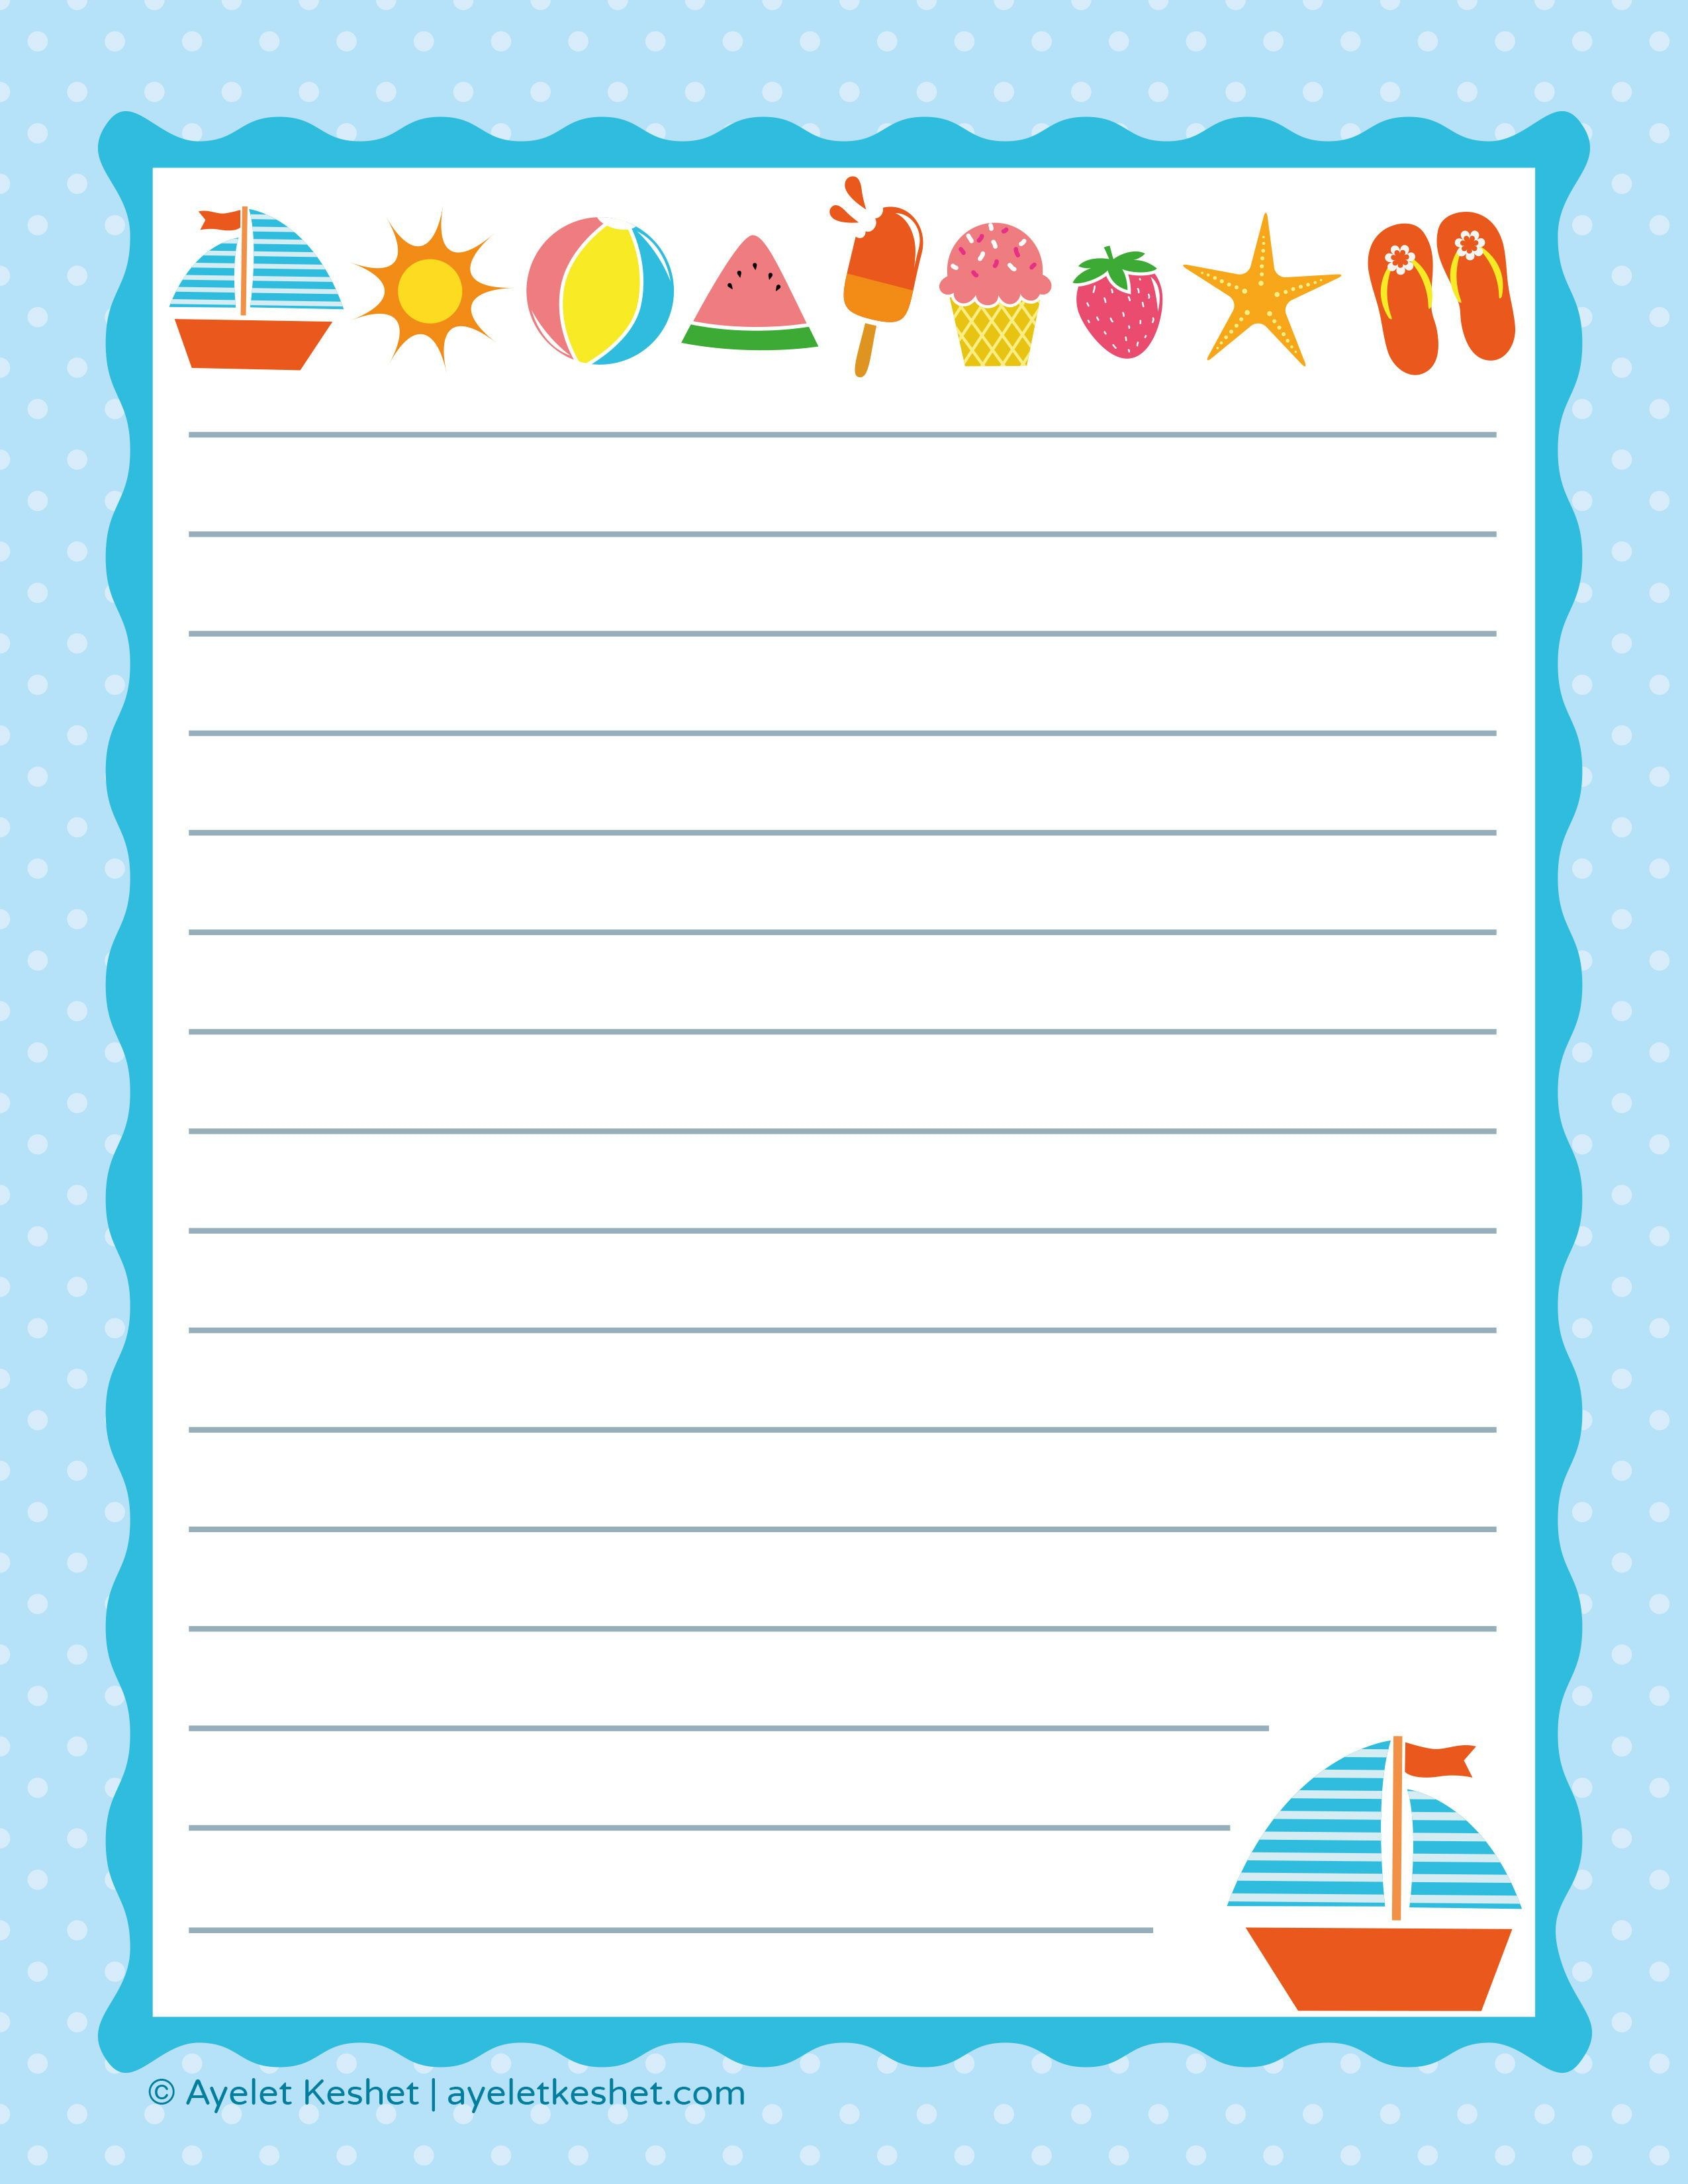 Free Printable Letter Paper | Printables To Go | Printable Letters - Free Printable Stationary With Lines